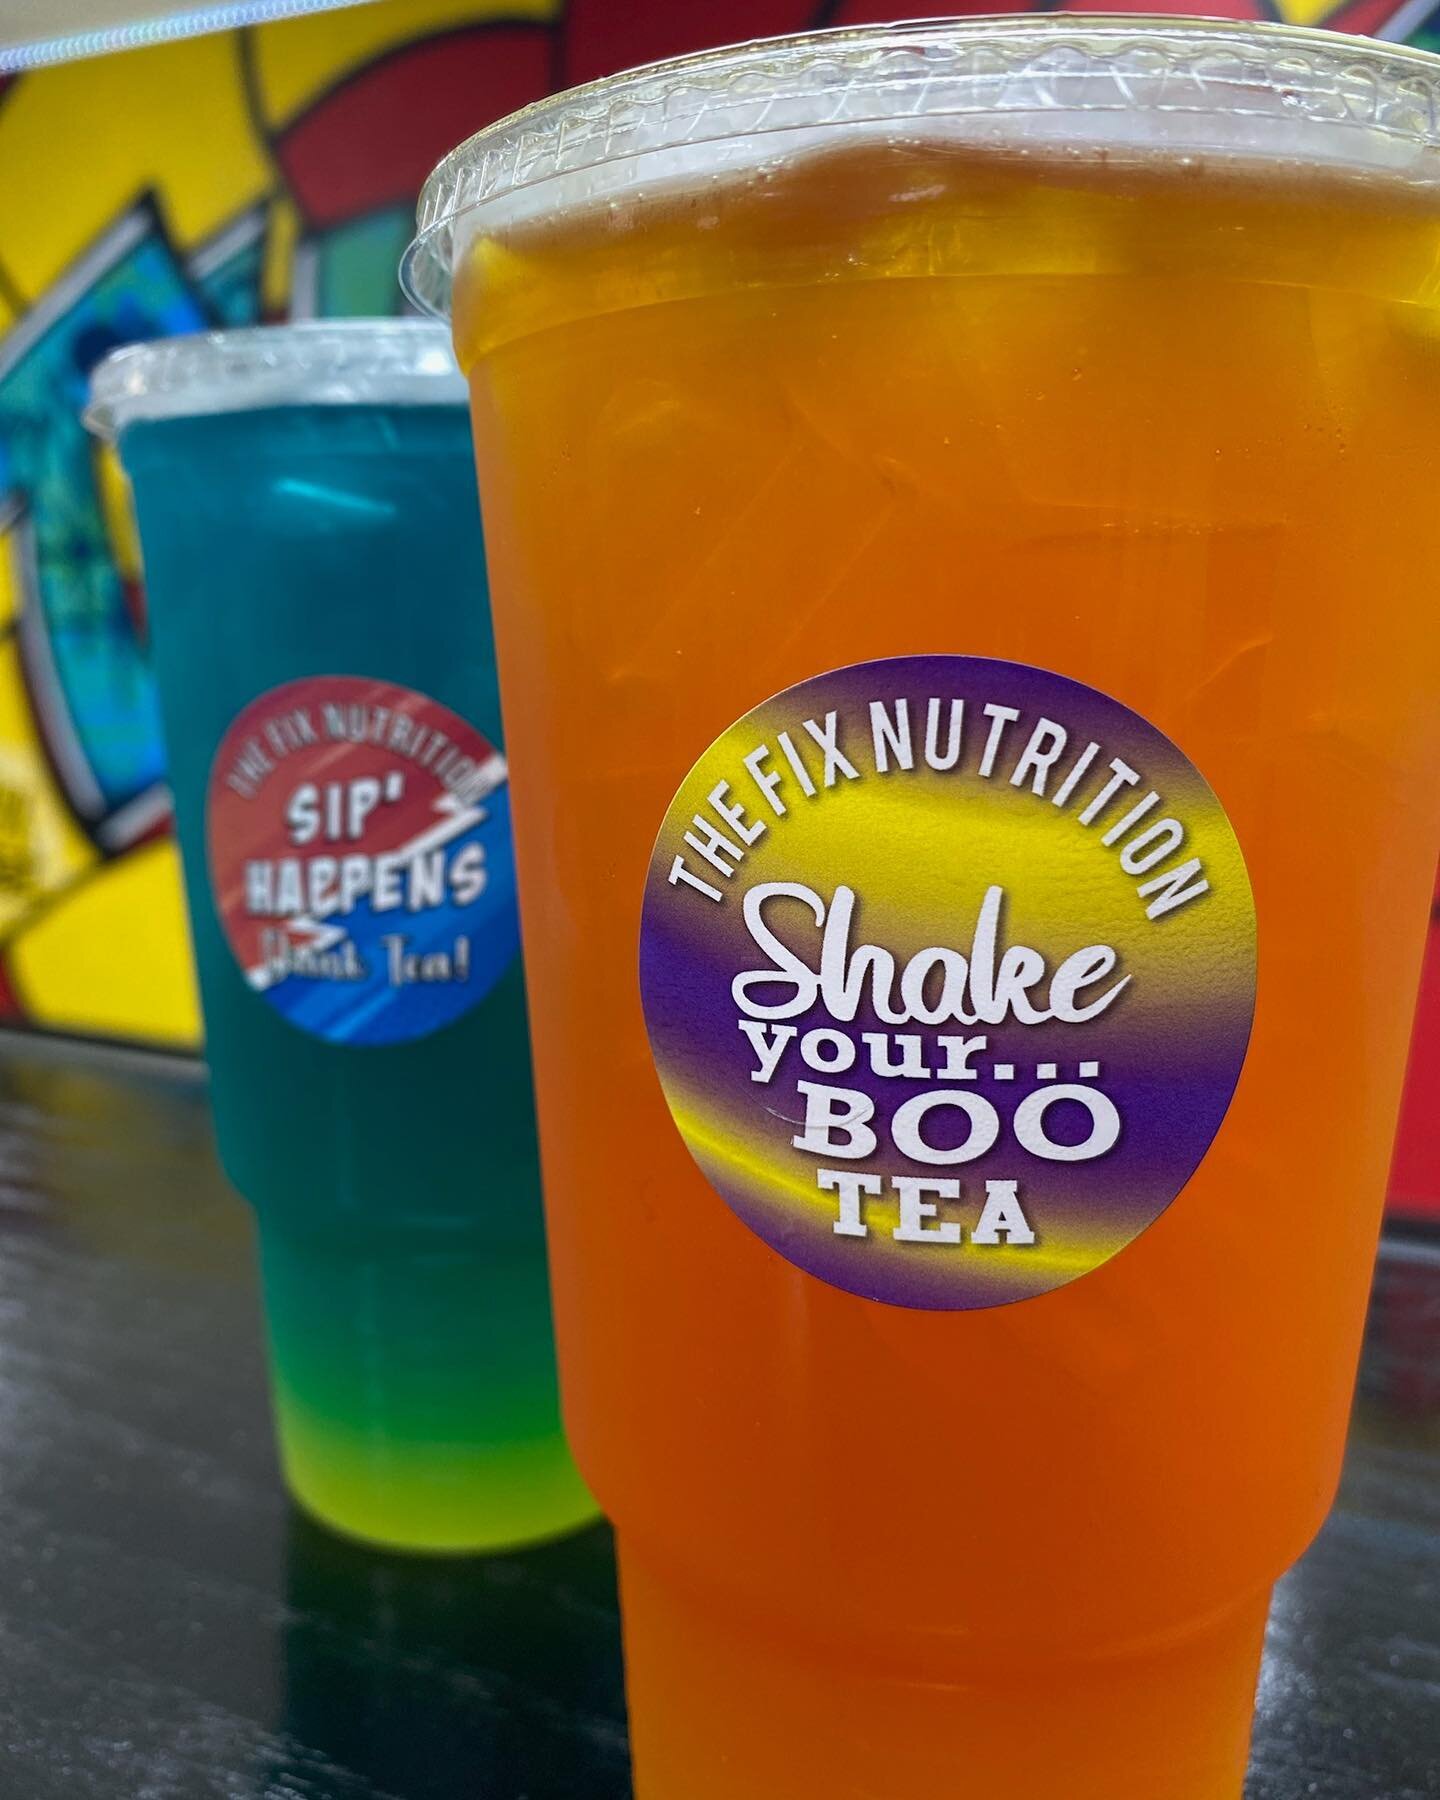 Yes!! Shake your boo-tea!!!! Hope your having a GREAT Saturday!!! Need a pick me up?? We got you! Here until 3pm! 

Sunday 9am to 3pm 
☎️ 734-693-2368 text/call ahead